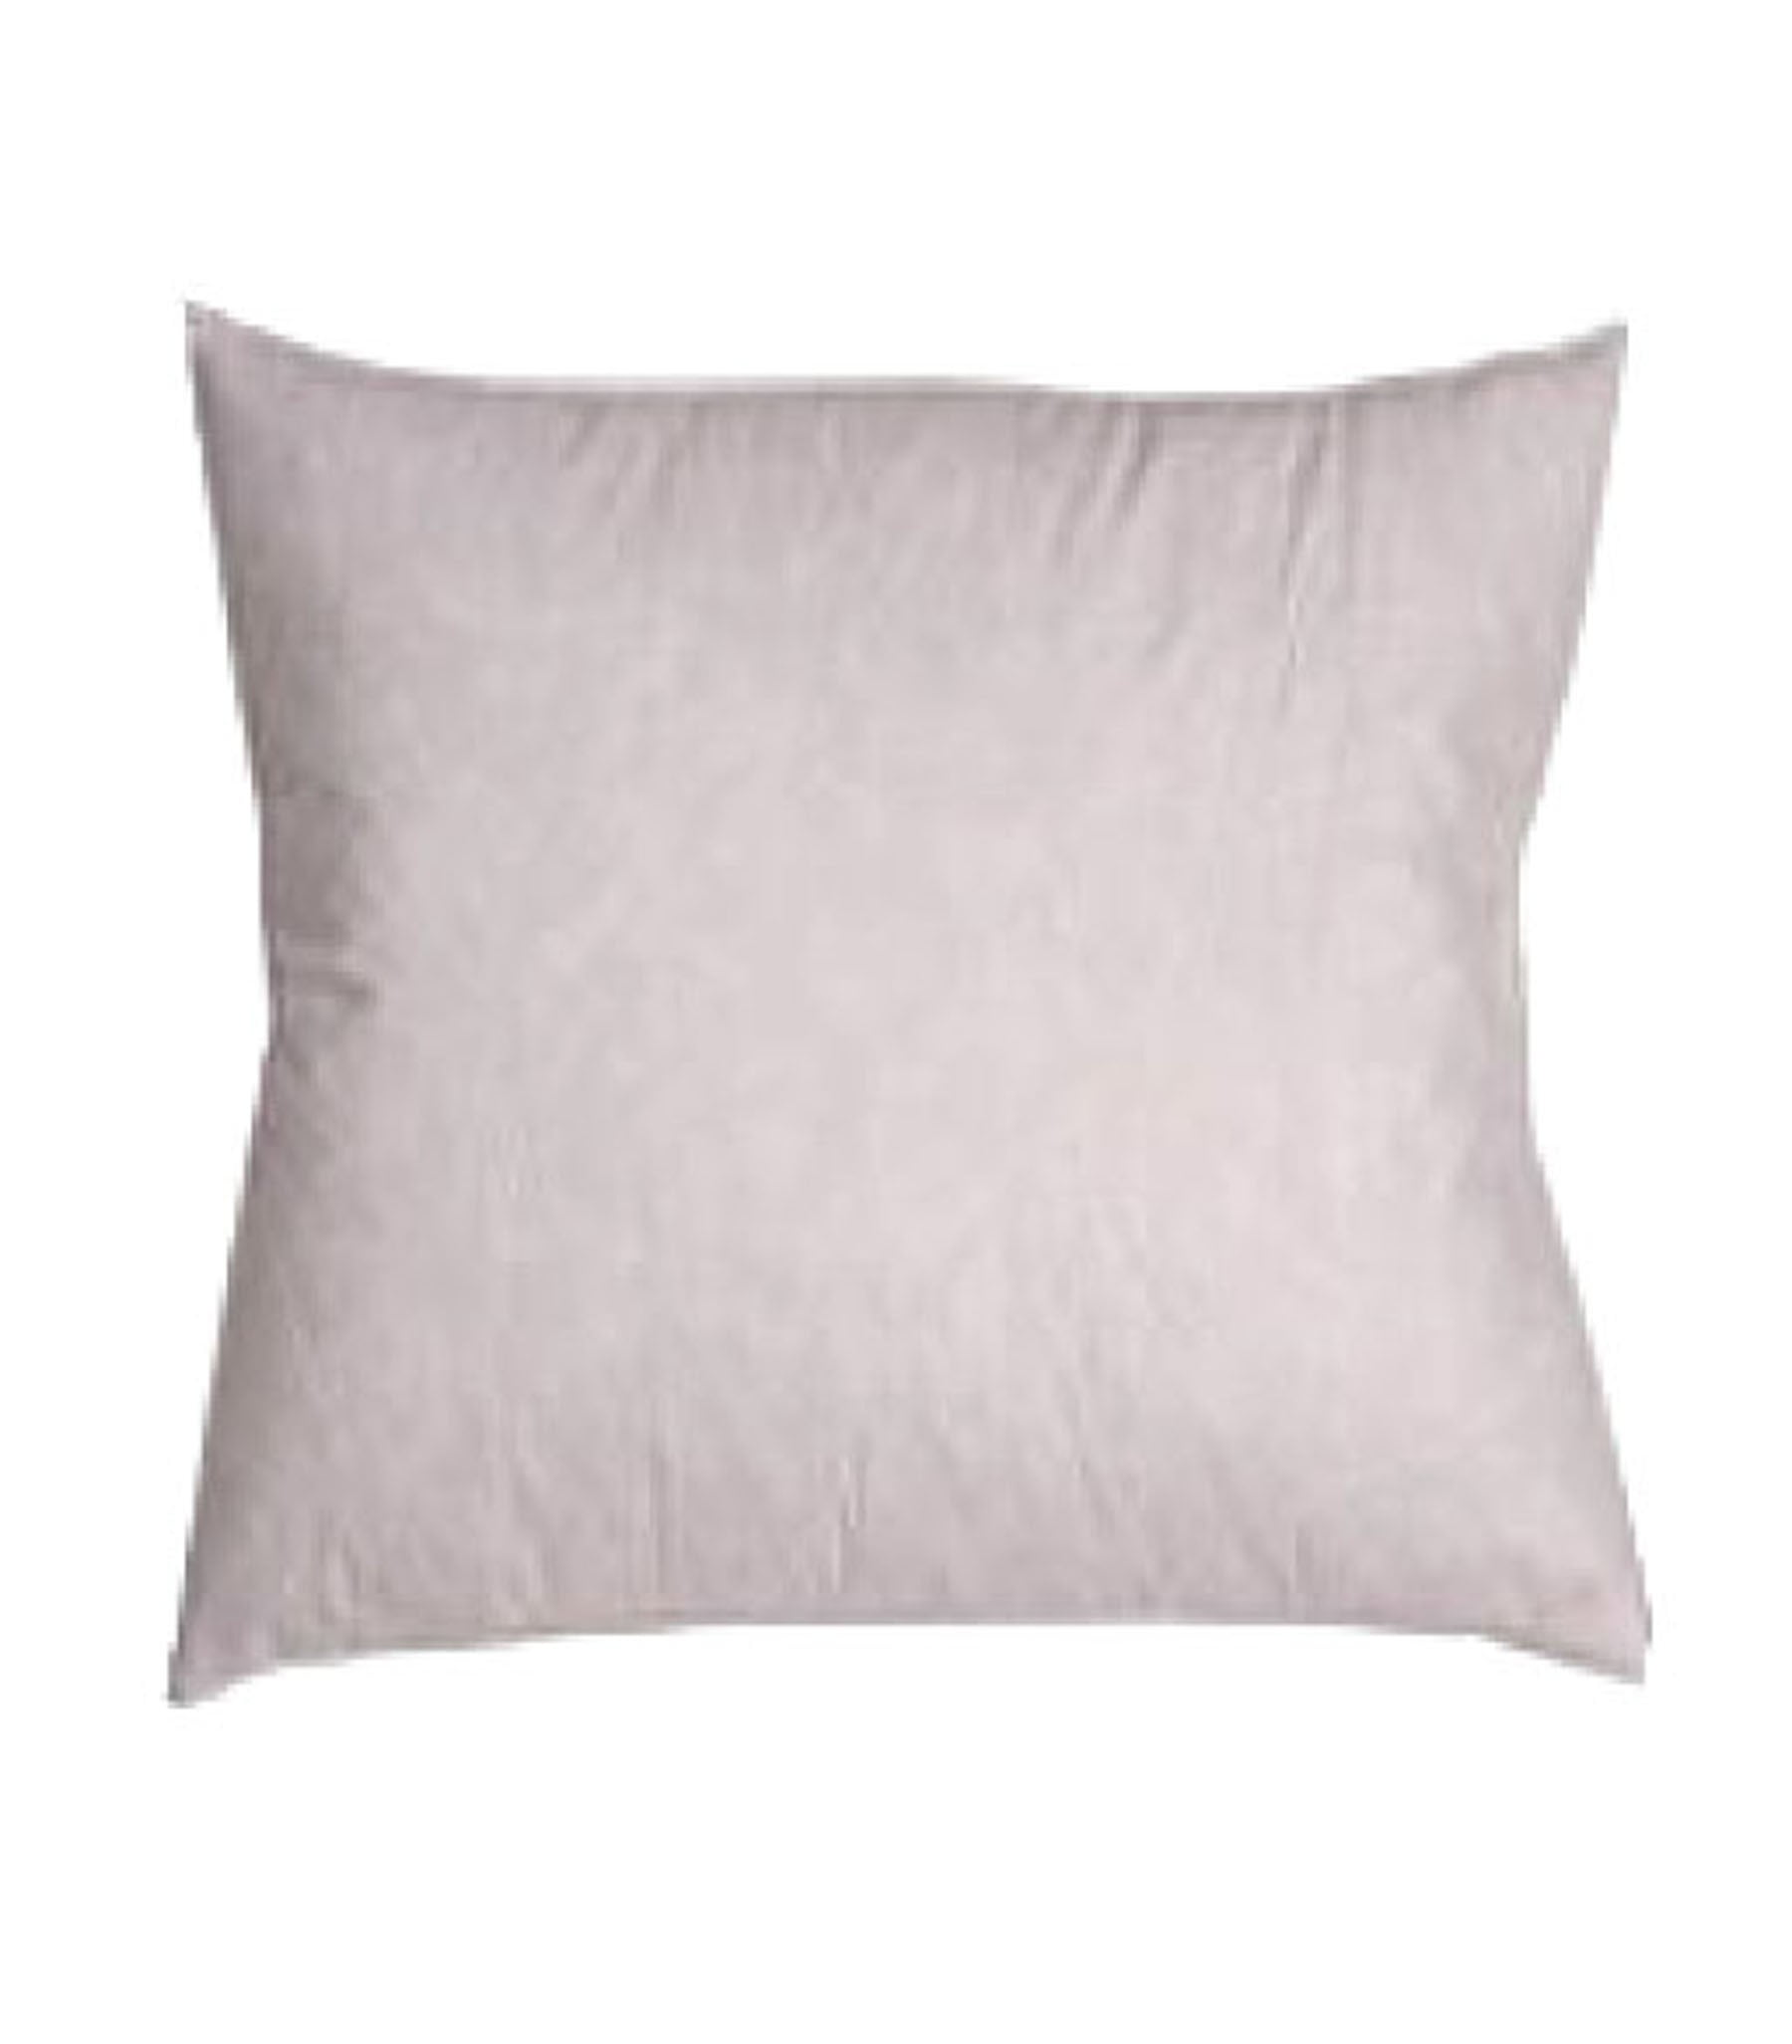  ACCENTHOME 18x18 Pillow Inserts (Pack of 4) Hypoallergenic  Throw Pillows Forms, White Square Throw Pillow Insert